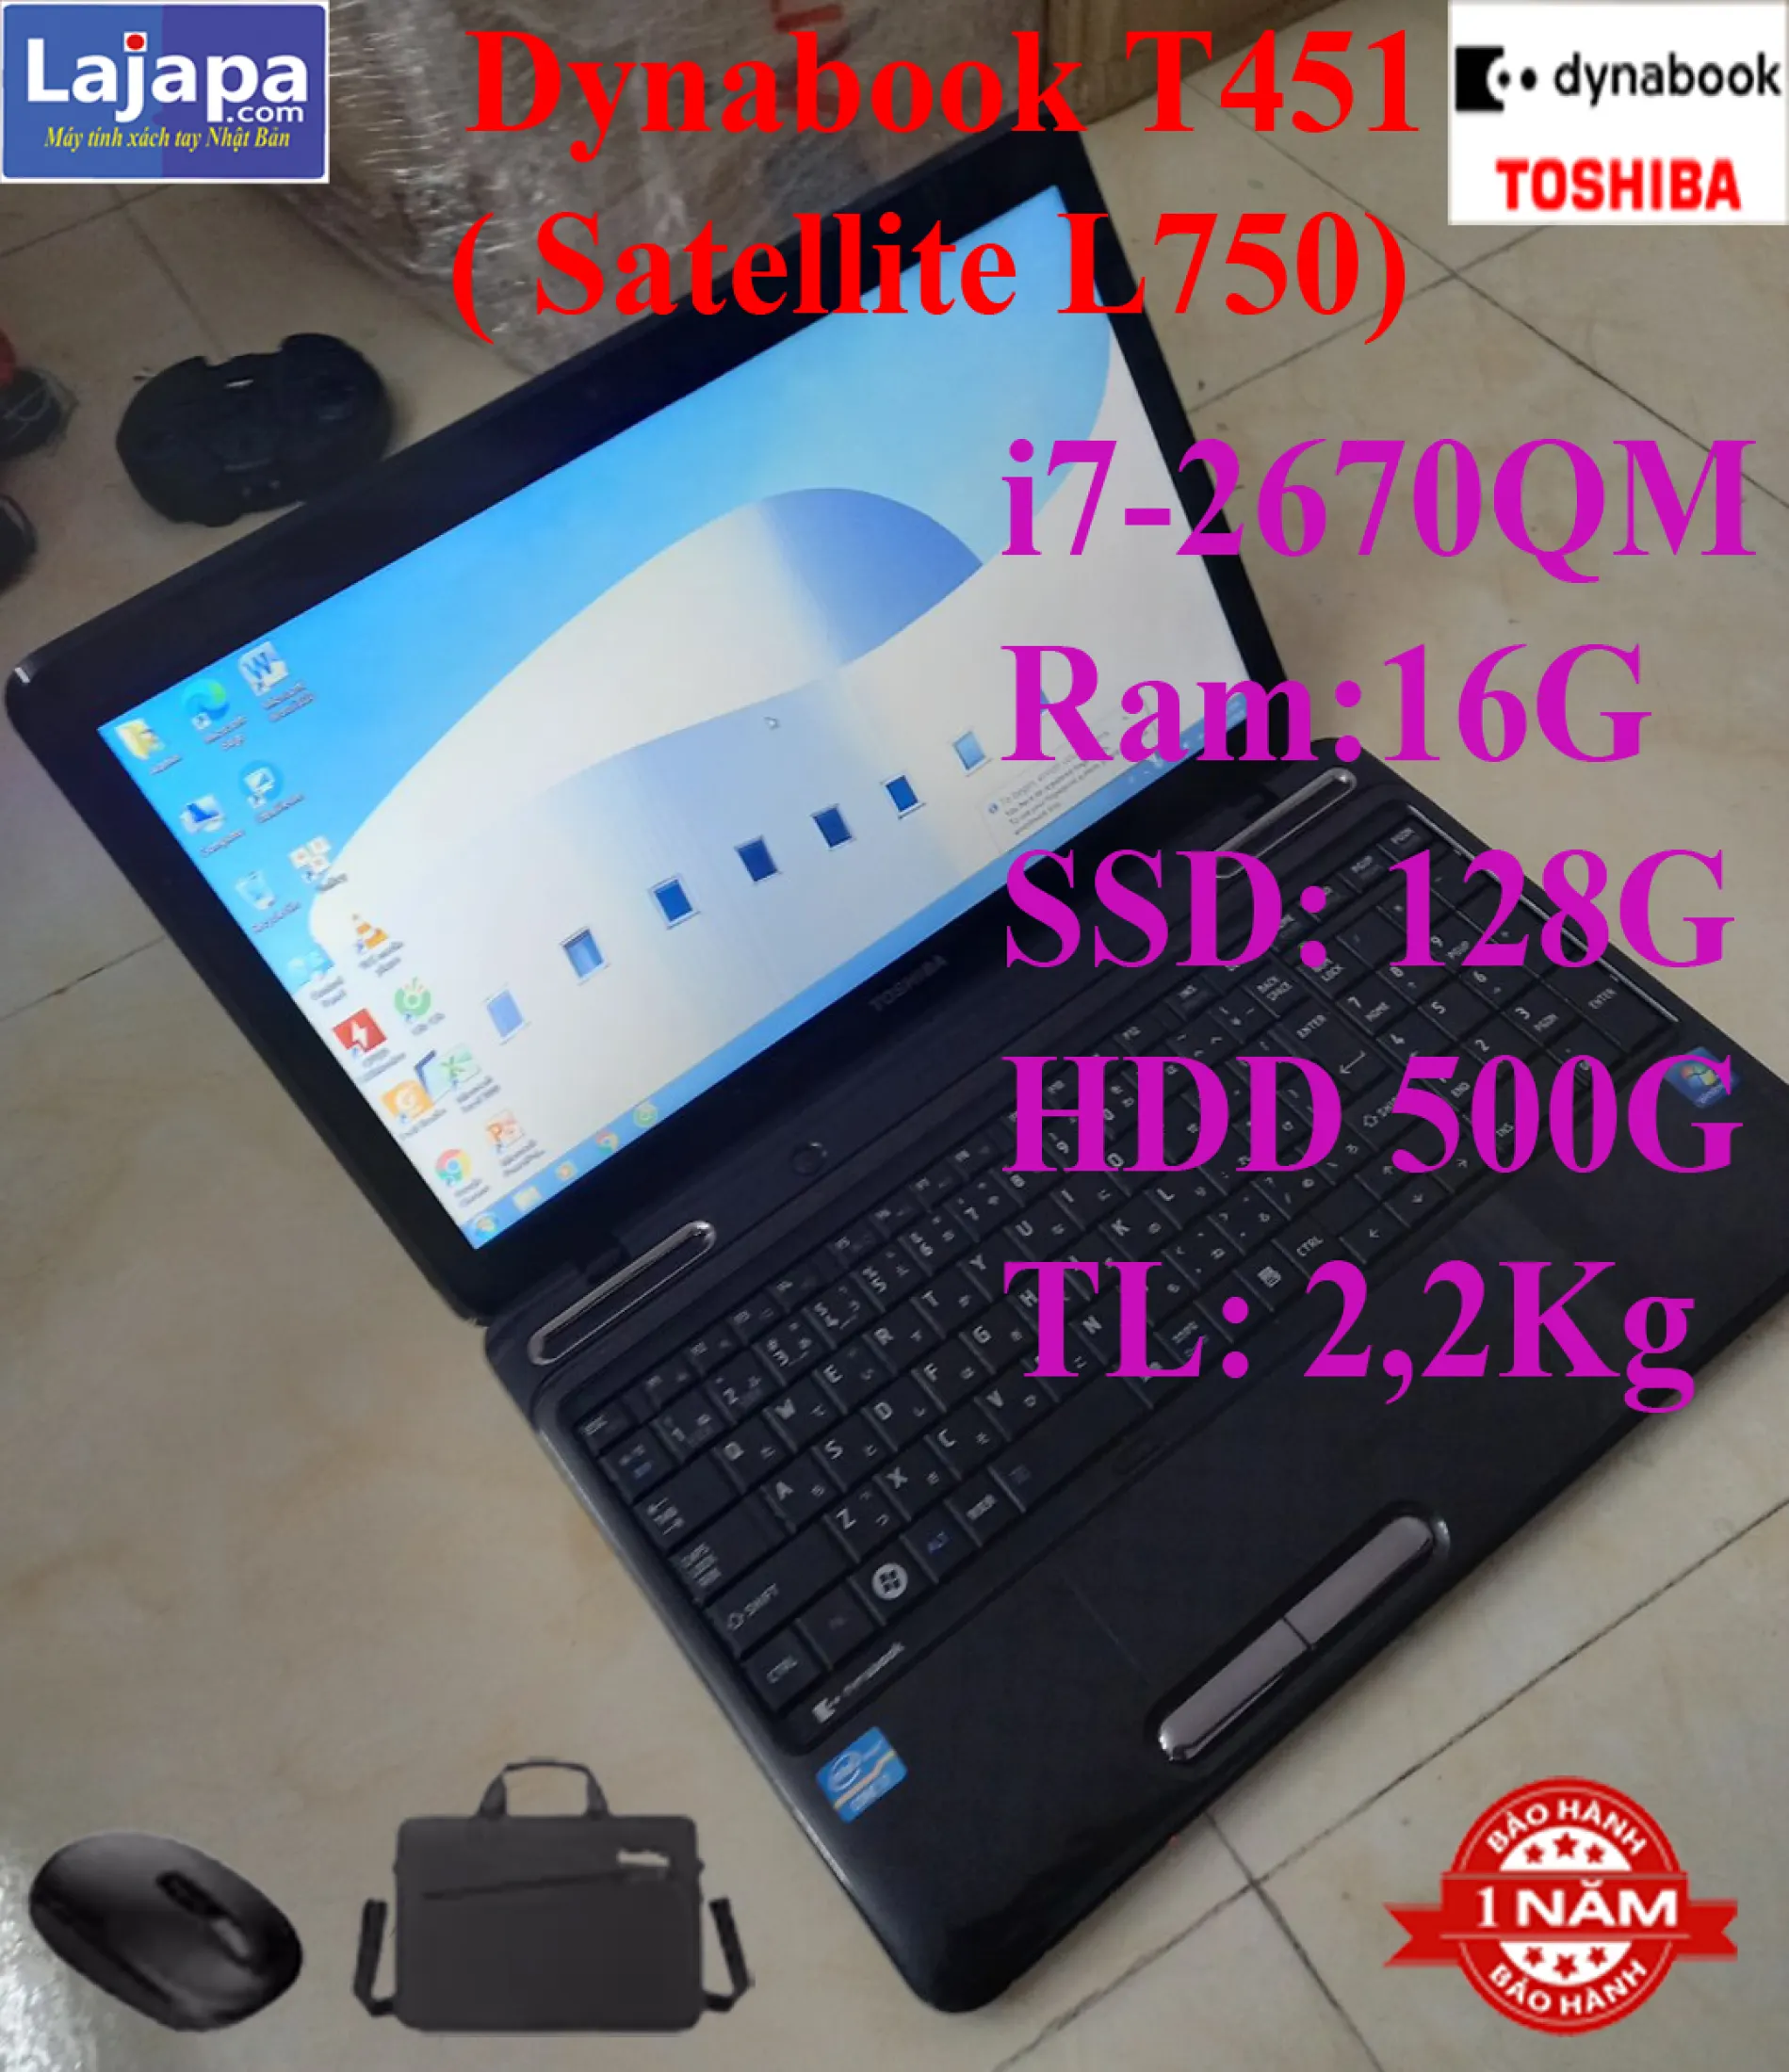 PC/タブレット ノートPC 【TOSHIBA】Satellite L750 (dynabook T451)